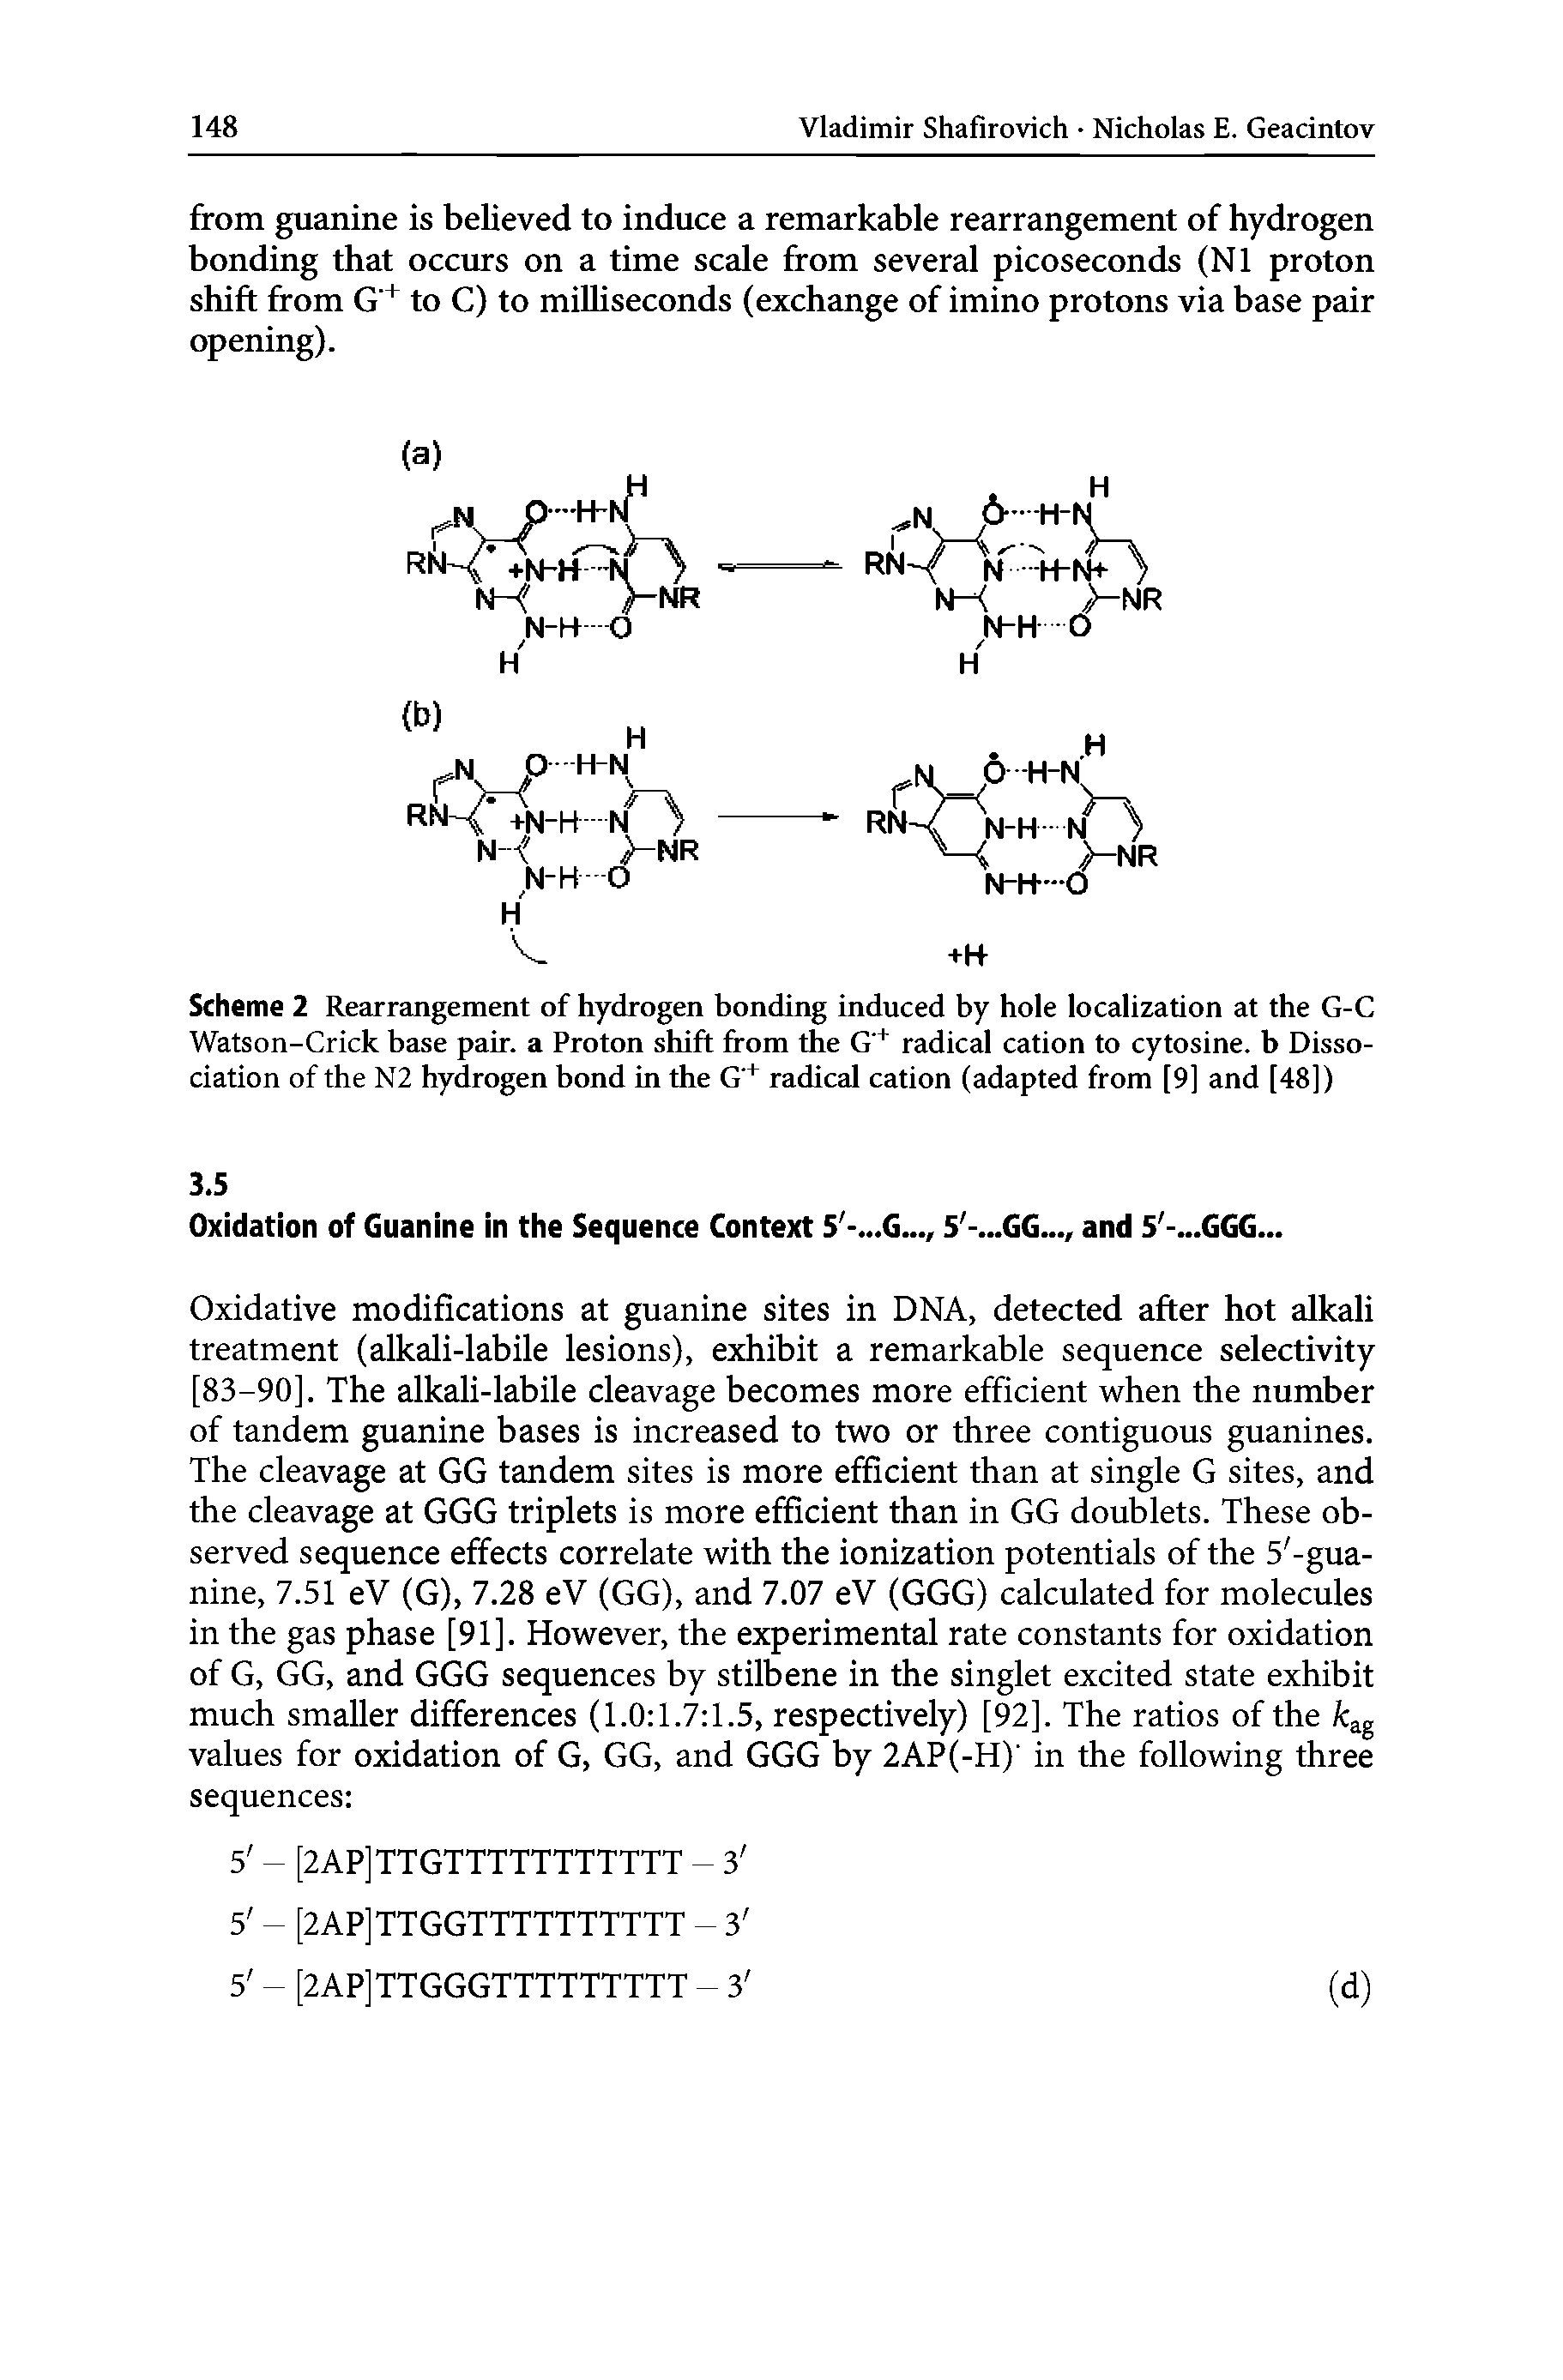 Scheme 2 Rearrangement of hydrogen bonding induced by hole localization at the G-C Watson-Crick base pair, a Proton shift from the G radical cation to cytosine, b Dissociation of the N2 hydrogen bond in the G radical cation (adapted from [9] and [48])...